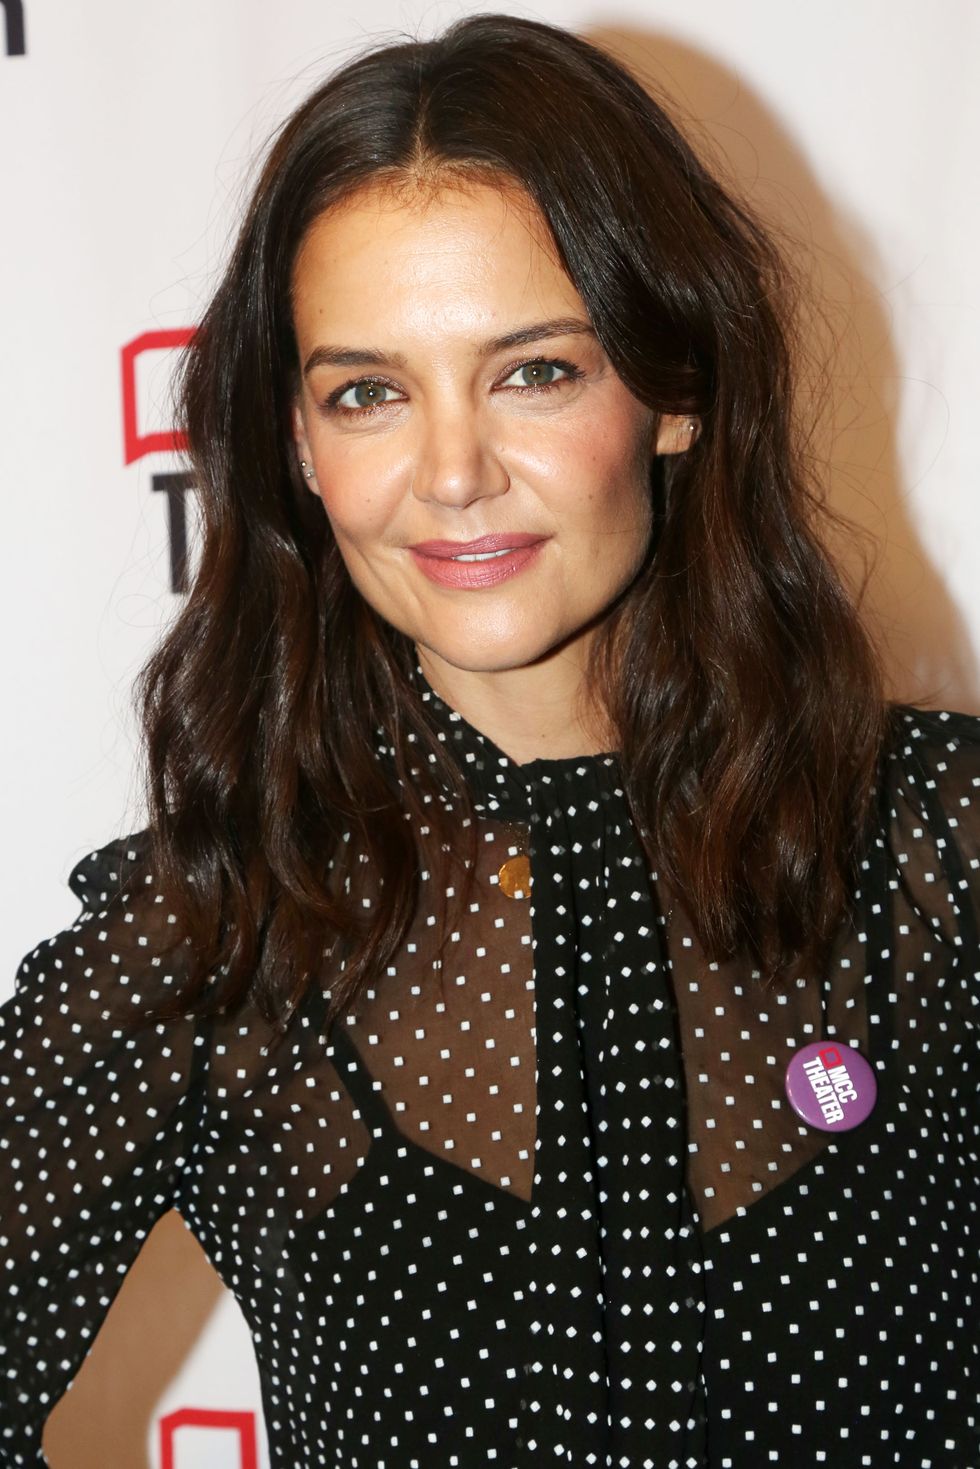 katie holmes outfits see through top instagram reaction